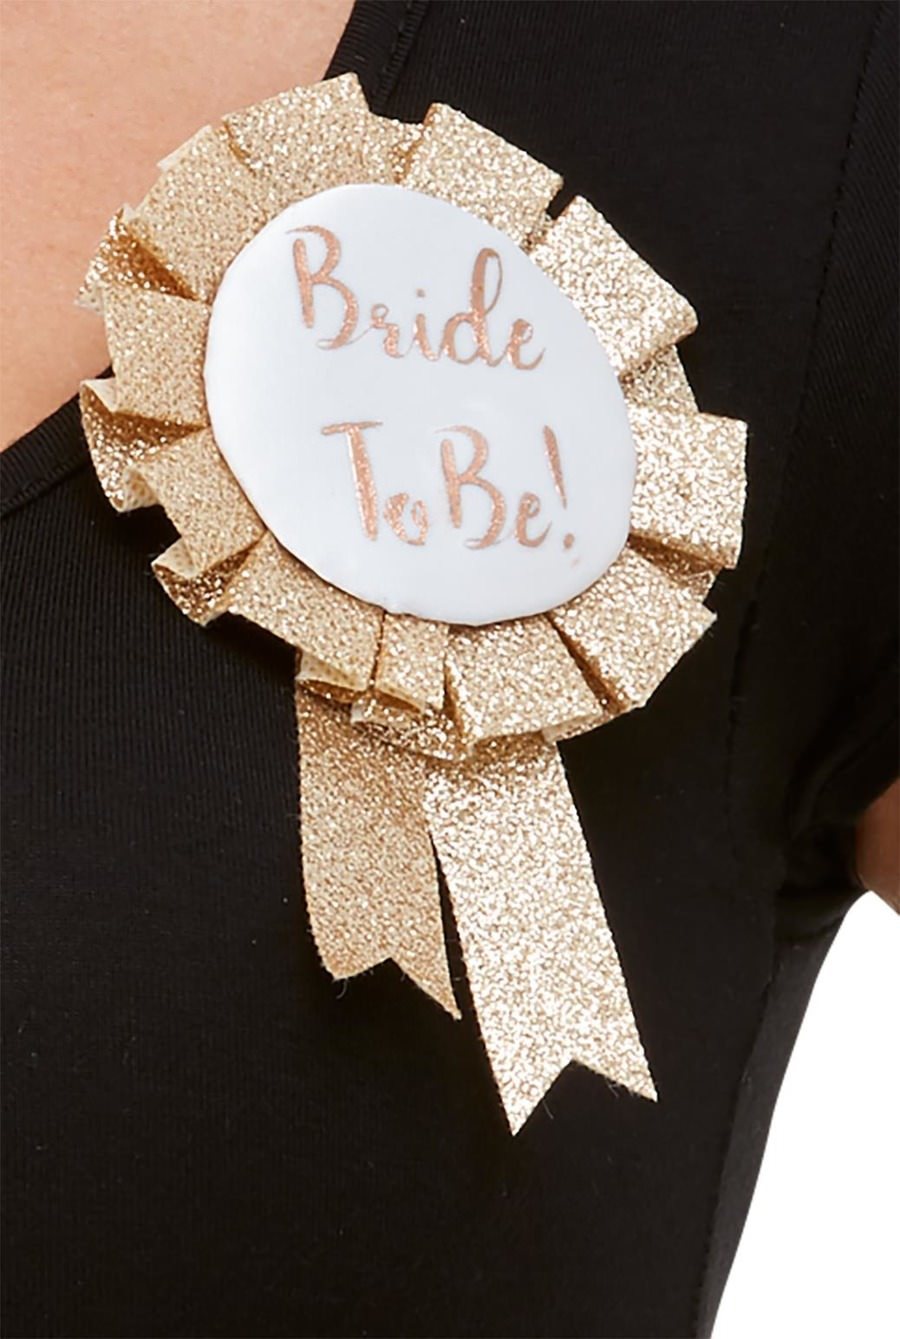 Bride To Be Rosette Wholesale